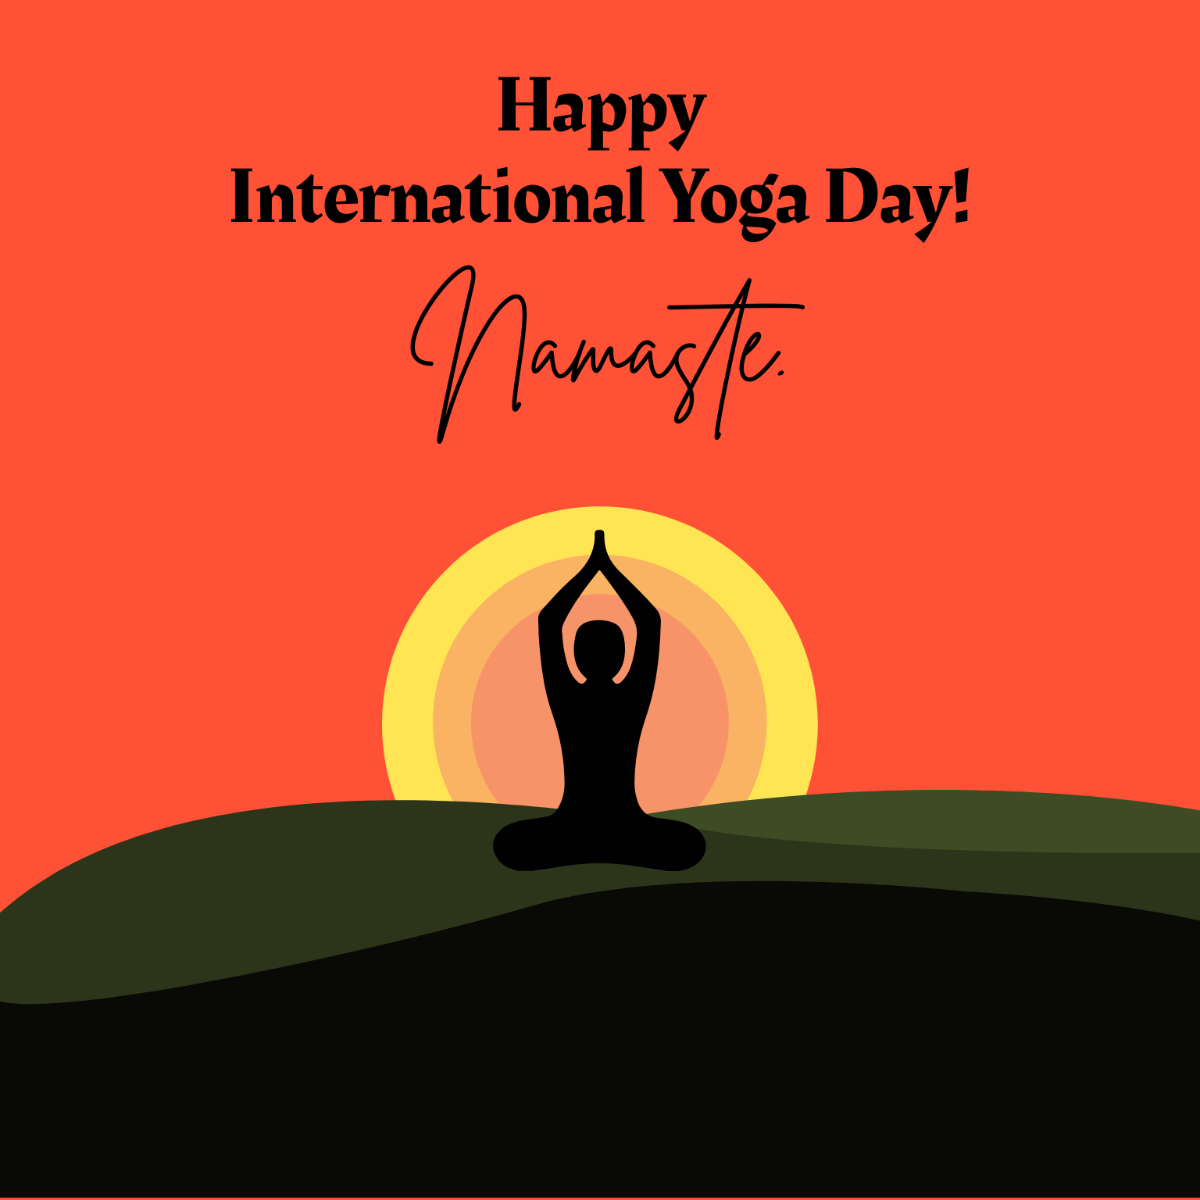 Free International Yoga Day Wishes Vector Template